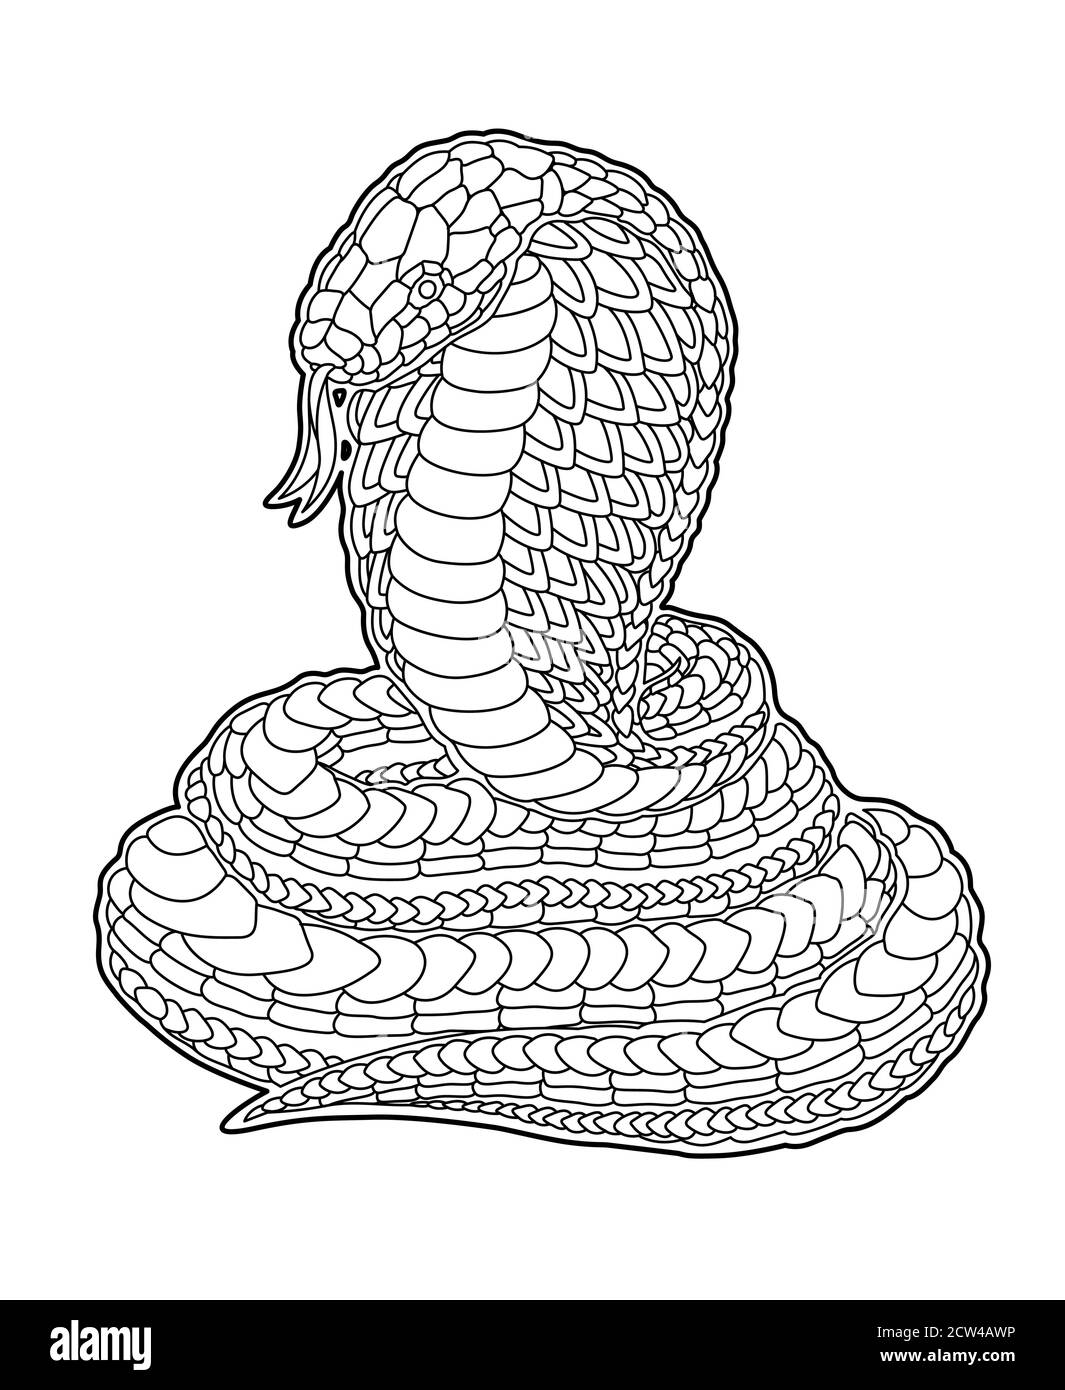 Snake coloring book for adults Royalty Free Vector Image